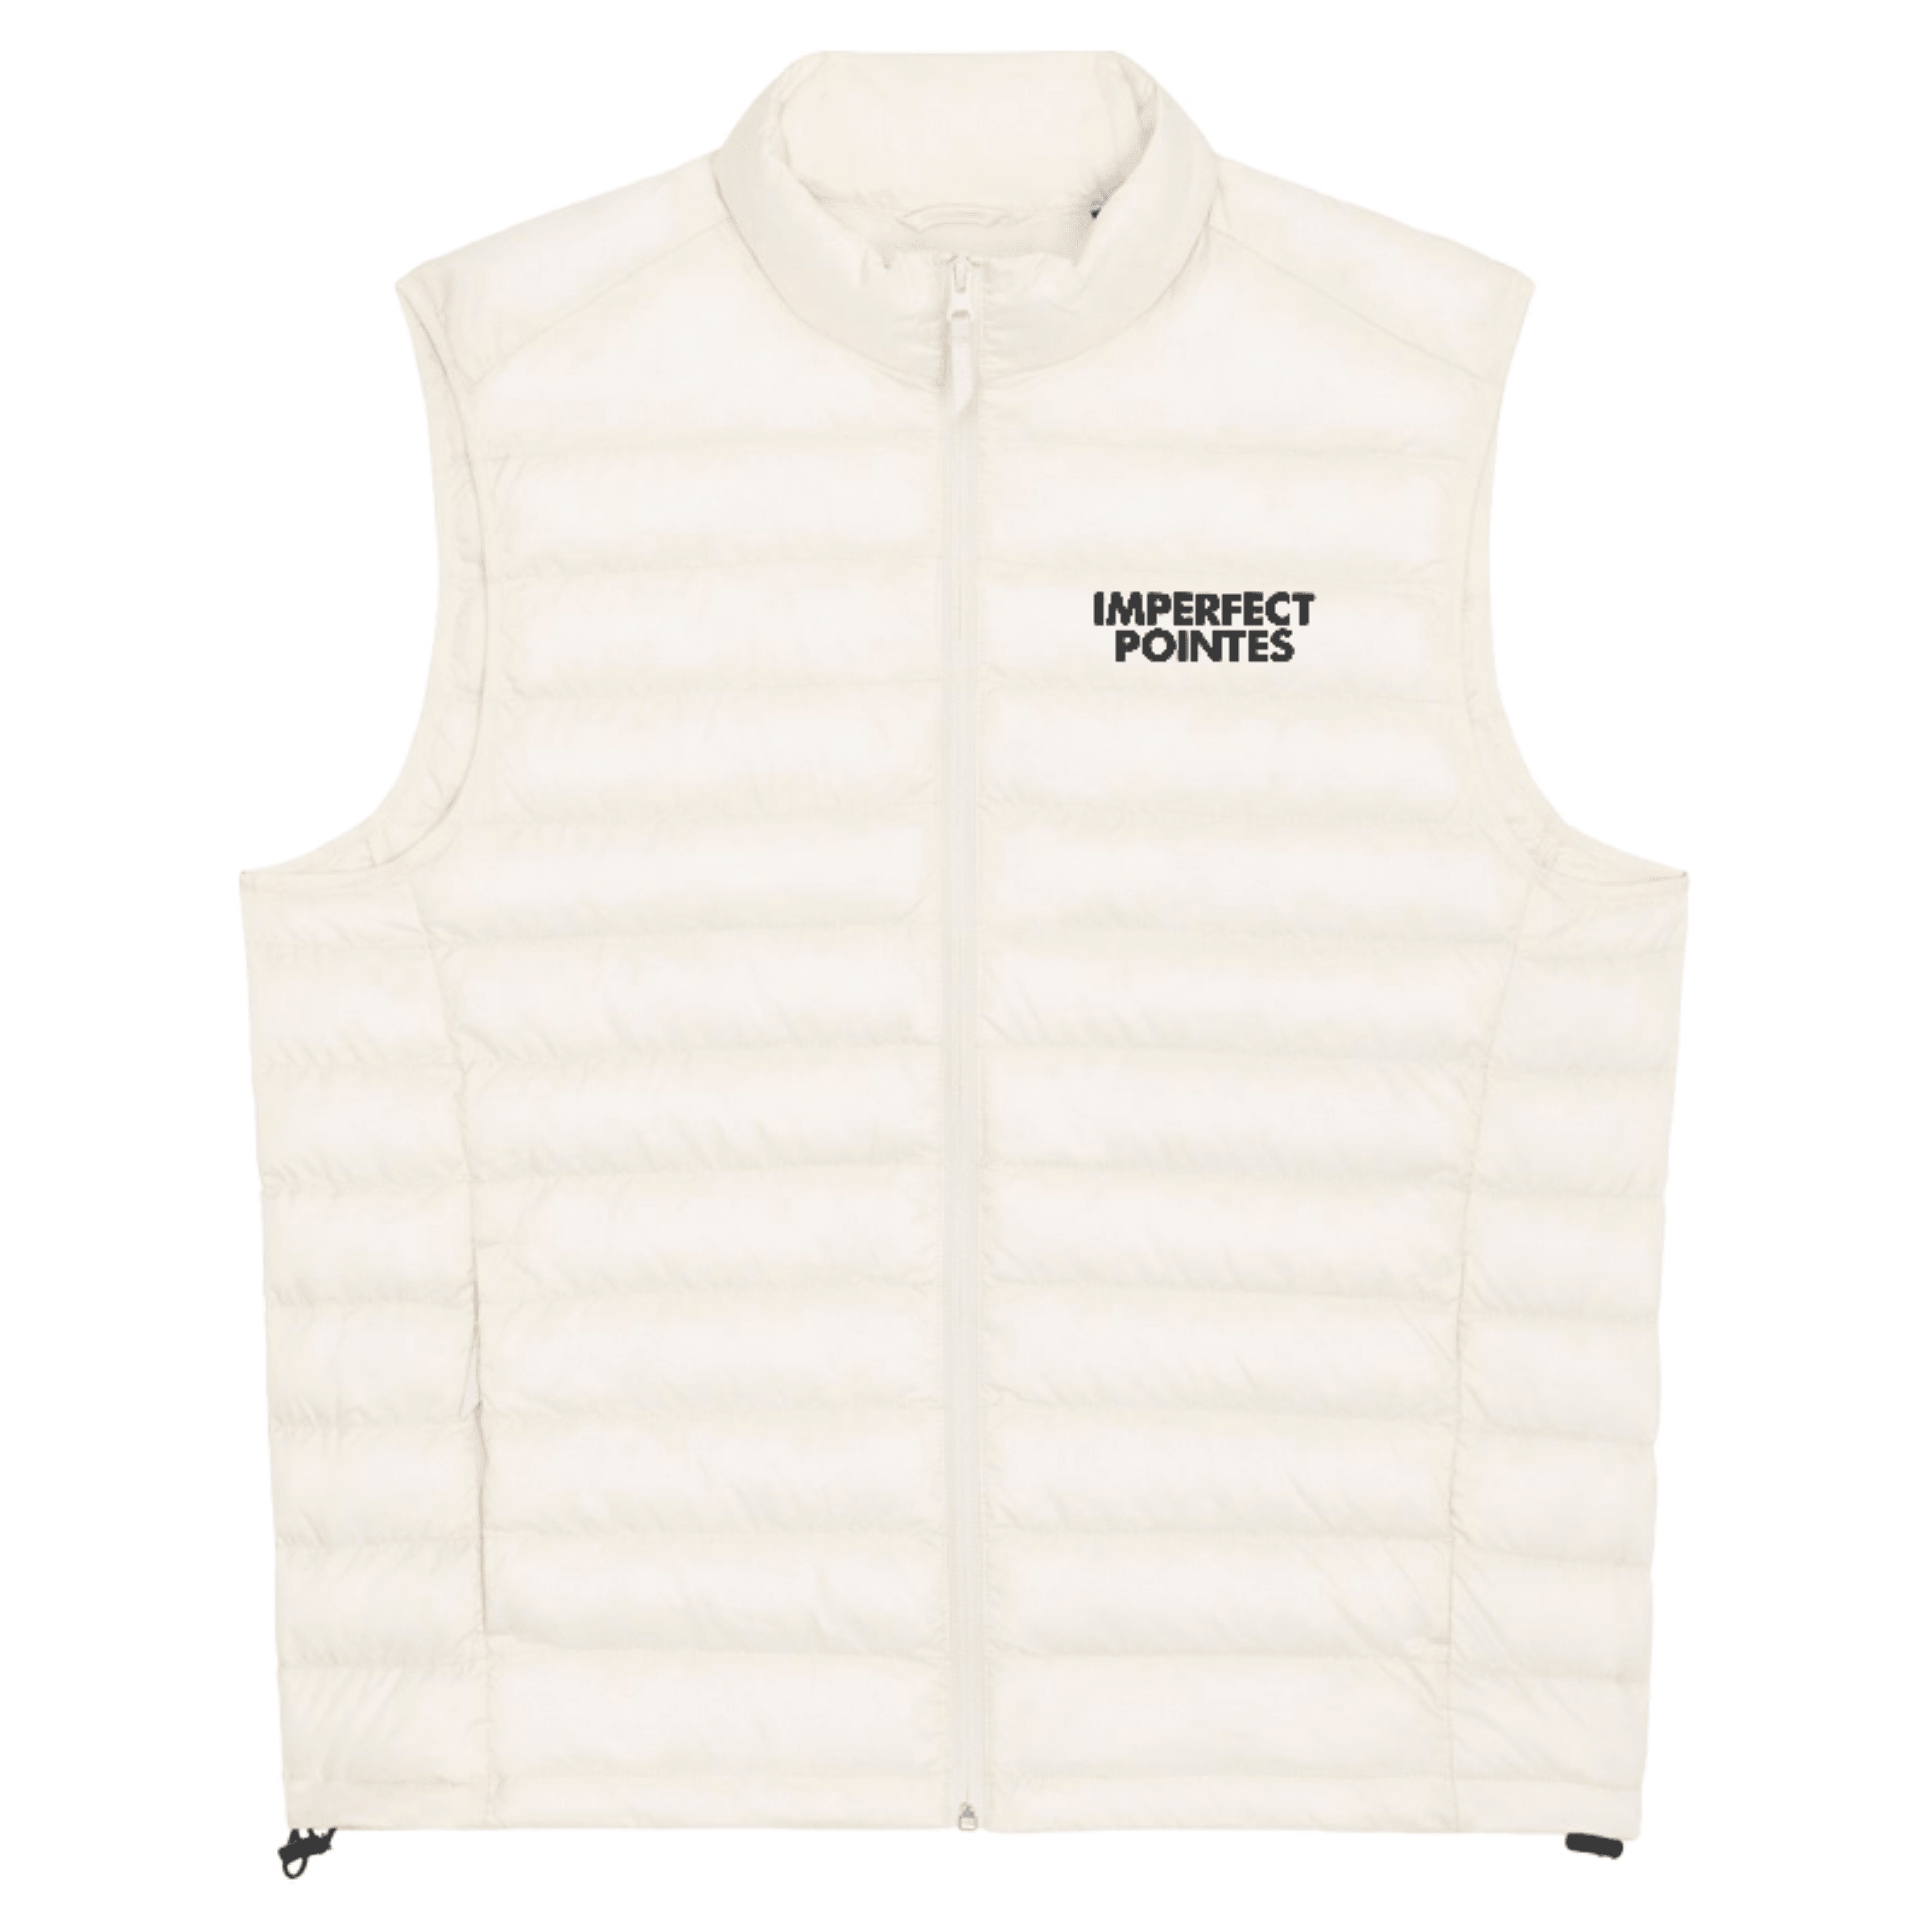 Mens Quilted Bodywarmer Gilet with Embroidered BLACK Logo - Accessories, New, Ready to Ship - Imperfect Pointes